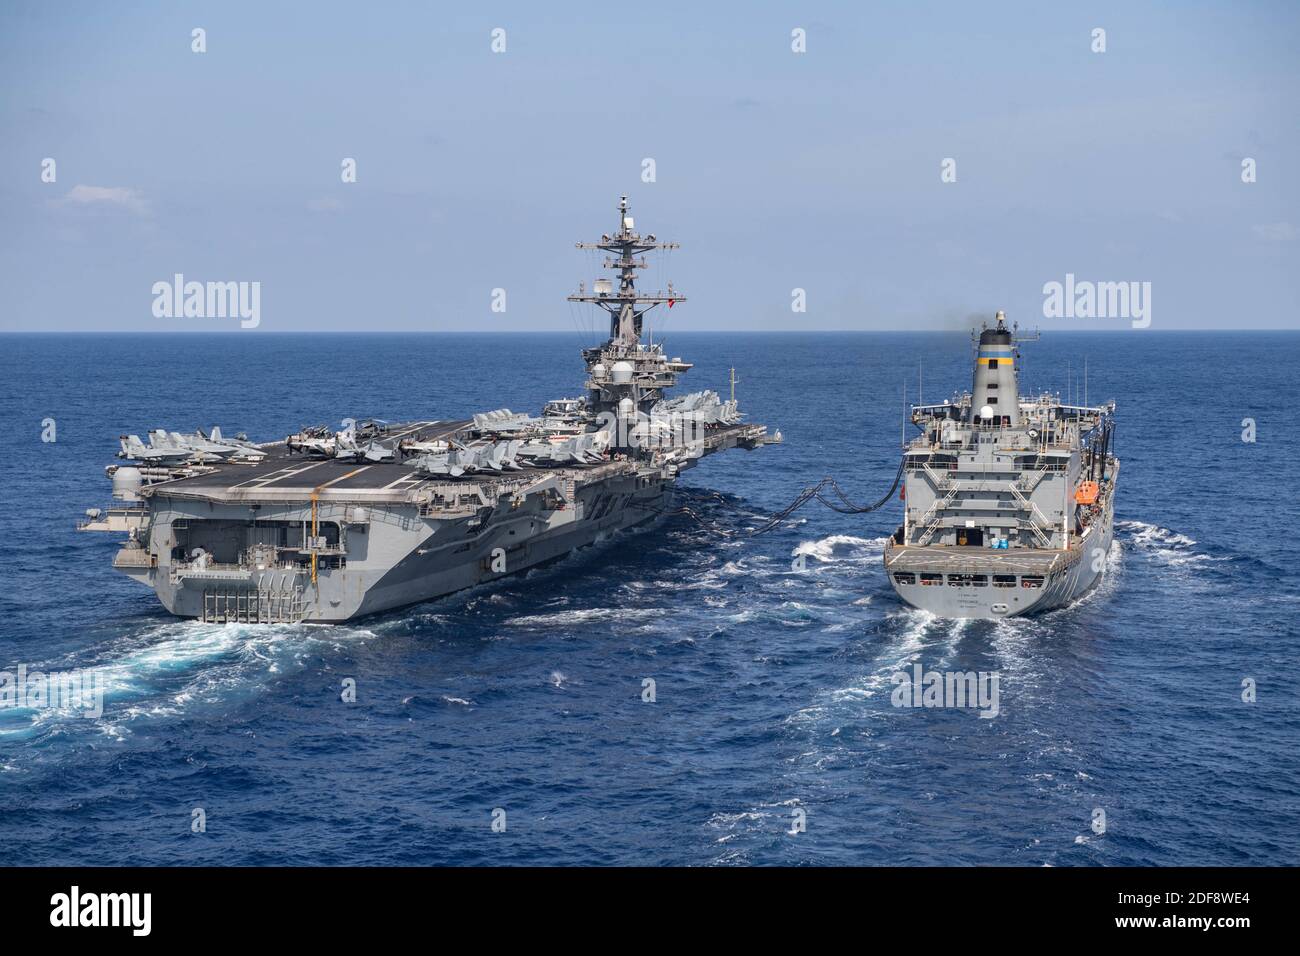 Handout file photo dated March 17, 2020of the aircraft carrier USS Theodore Roosevelt (CVN 71) receives fuel from the fleet replenishment oiler USNS Tippecanoe (T-AO 199) in the China Sea. Brett Crozier, captain of nuclear aircraft carrier Theodore Roosevelt, with more than 100 sailors infected with the coronavirus pleaded Monday with U.S. Navy officials for resources to allow isolation of his entire crew and avoid possible deaths in a situation he described as quickly deteriorating. Photo by US Navy via ABACAPRESS.COM Stock Photo